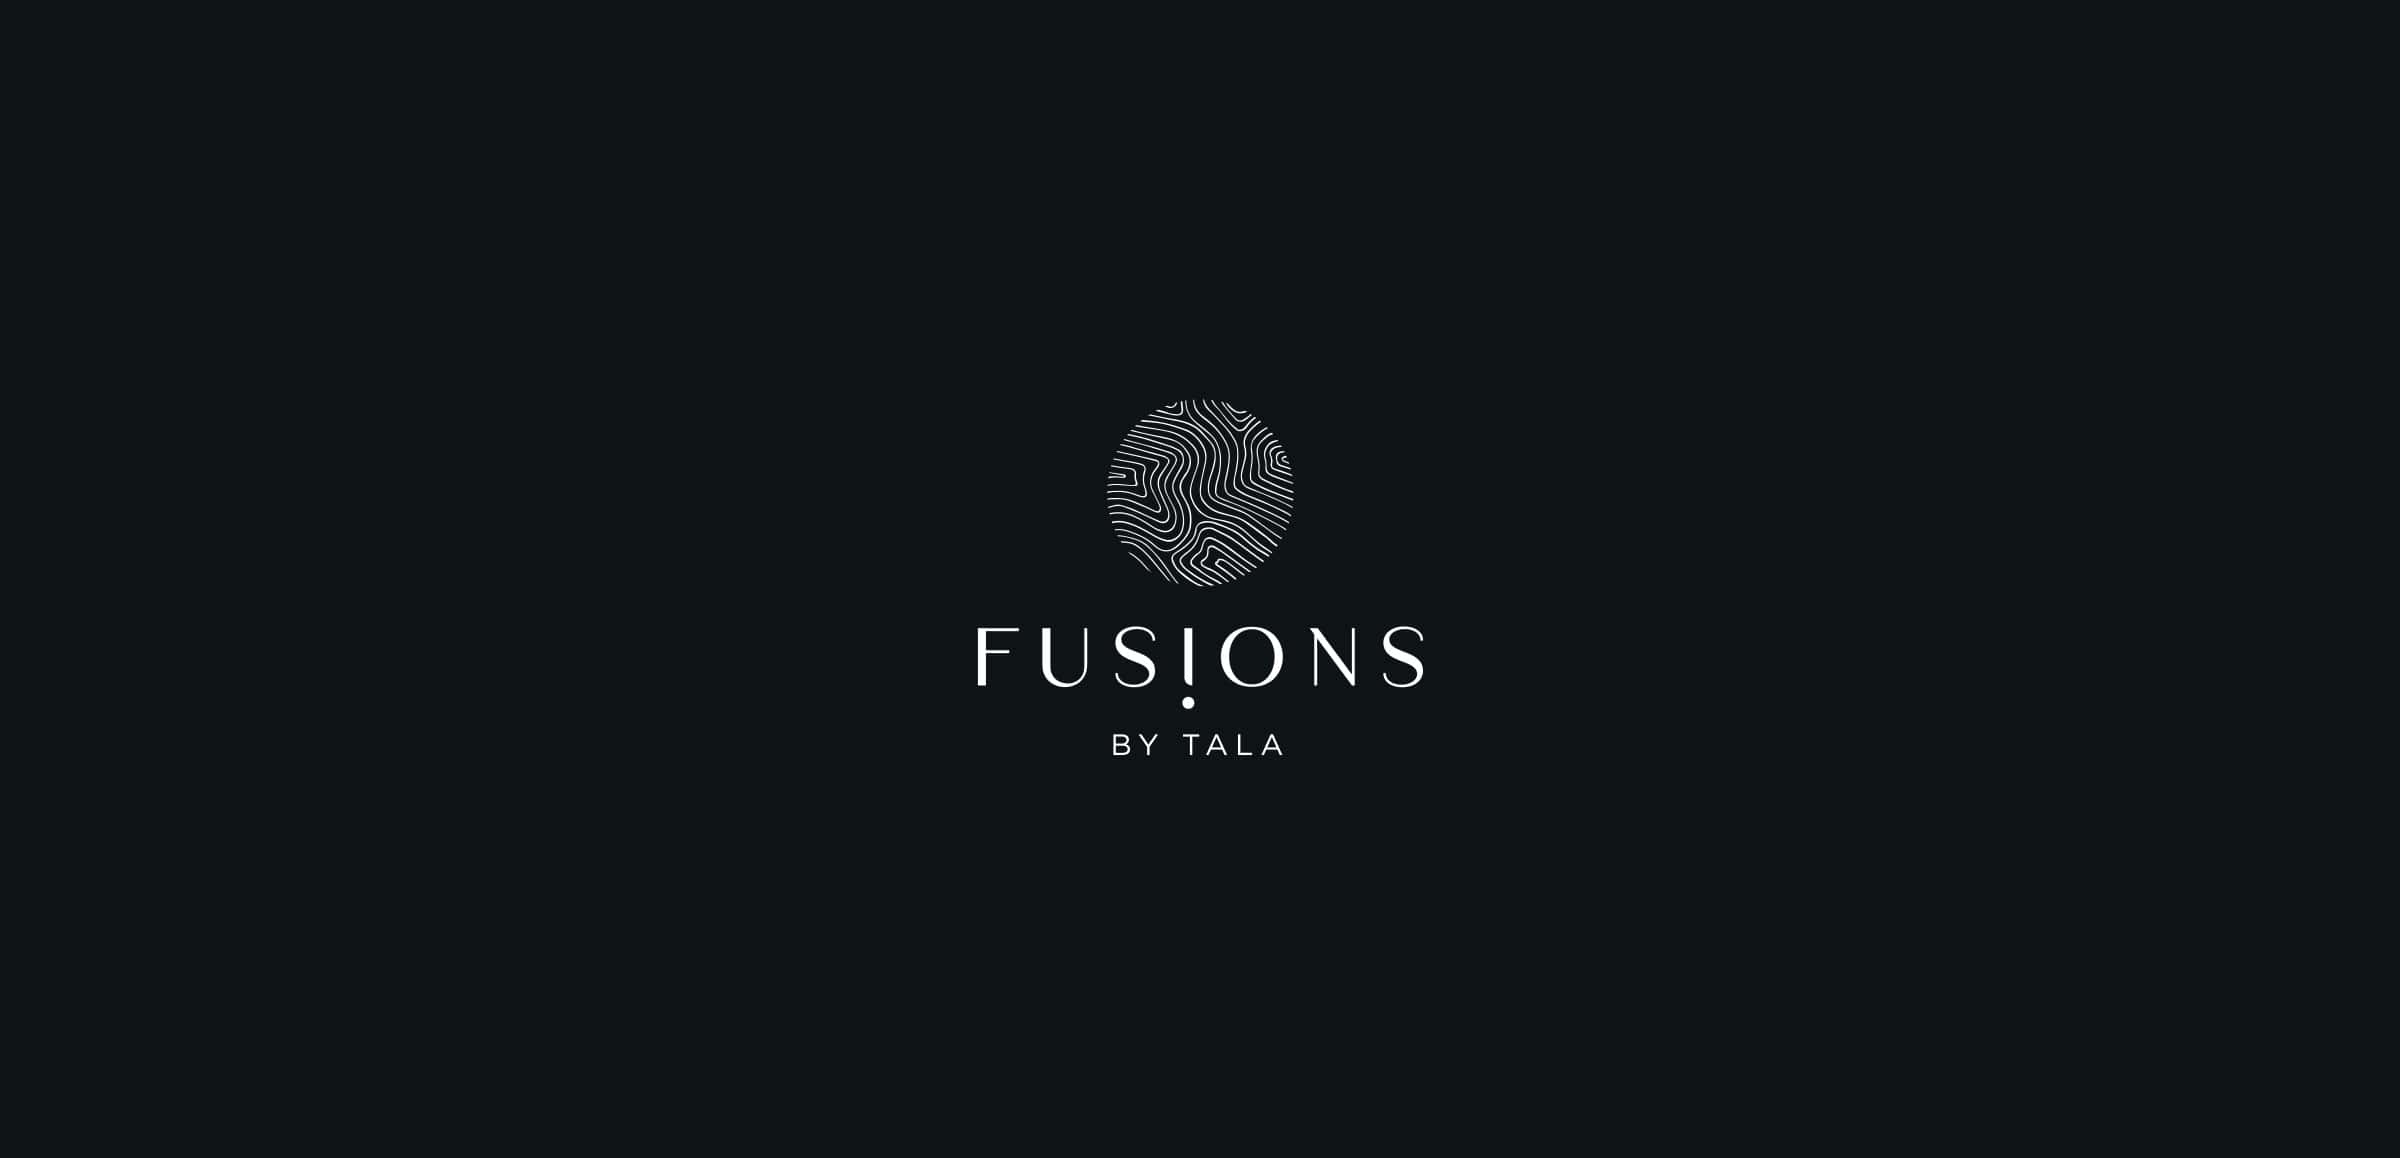 FUSIONS BY TALA